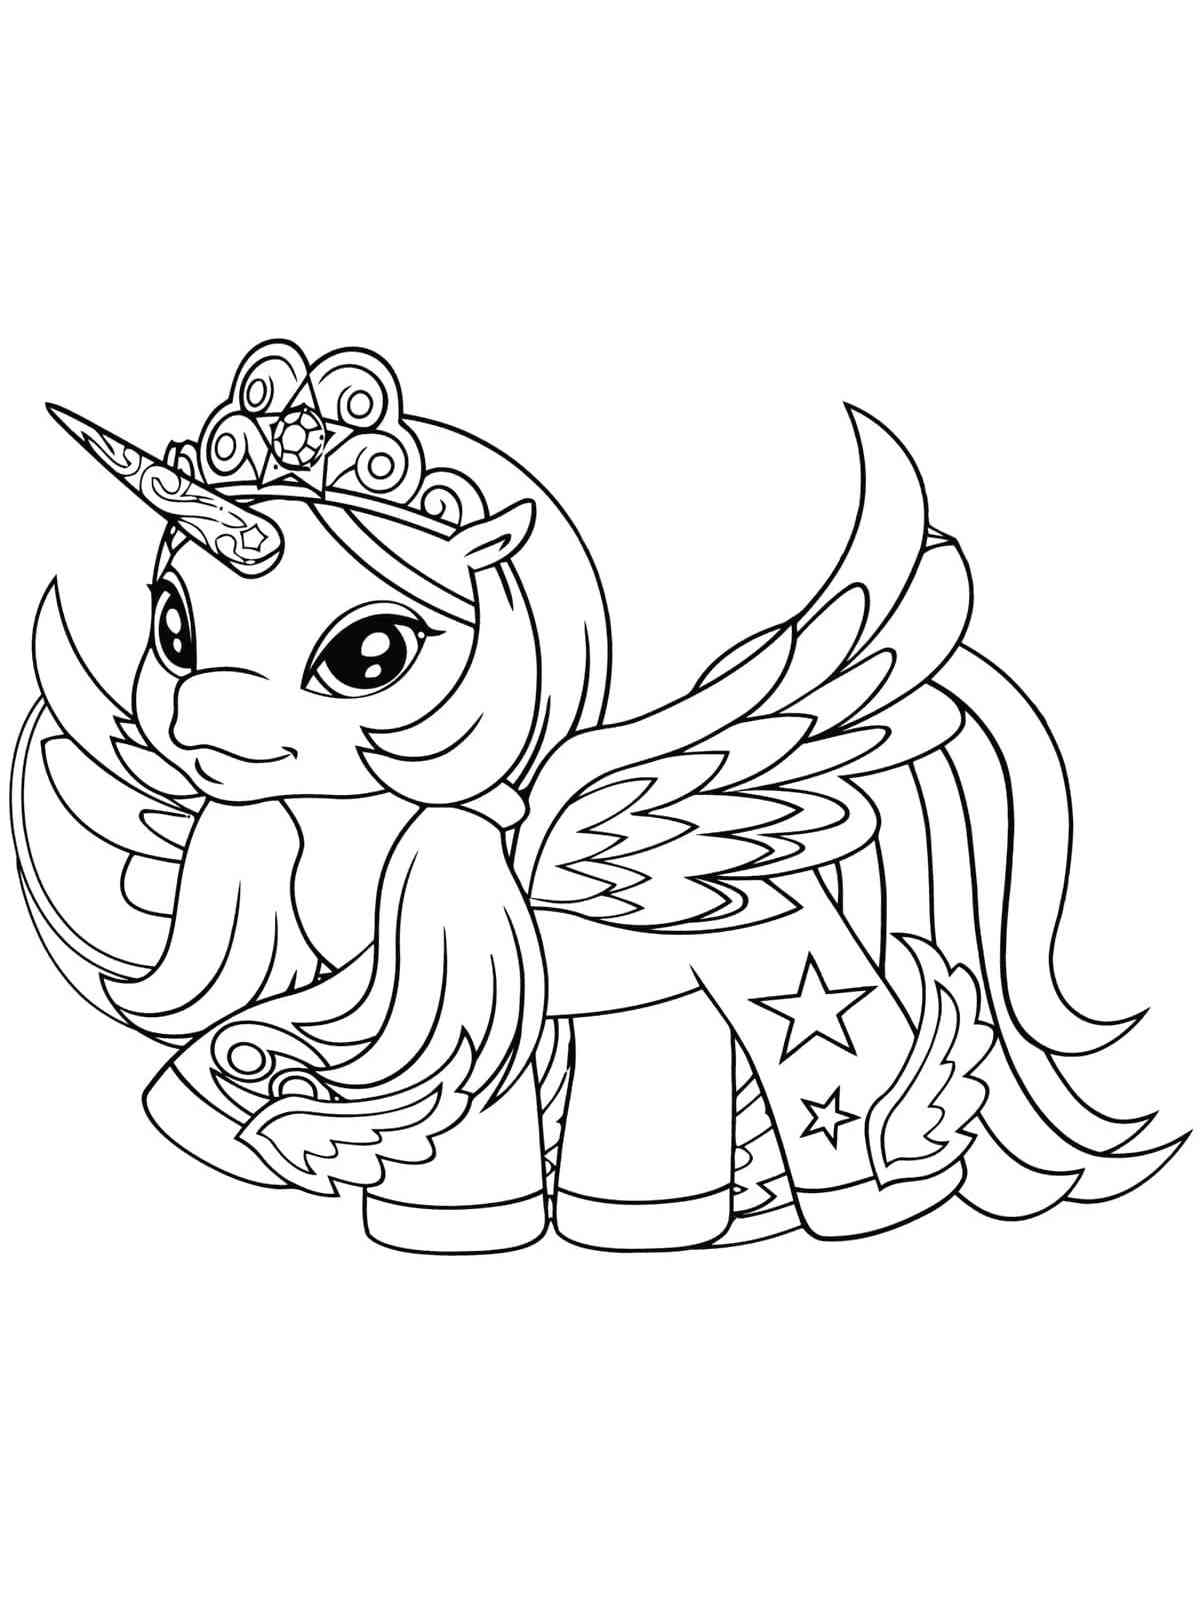 Filly Funtasia 2 coloring page